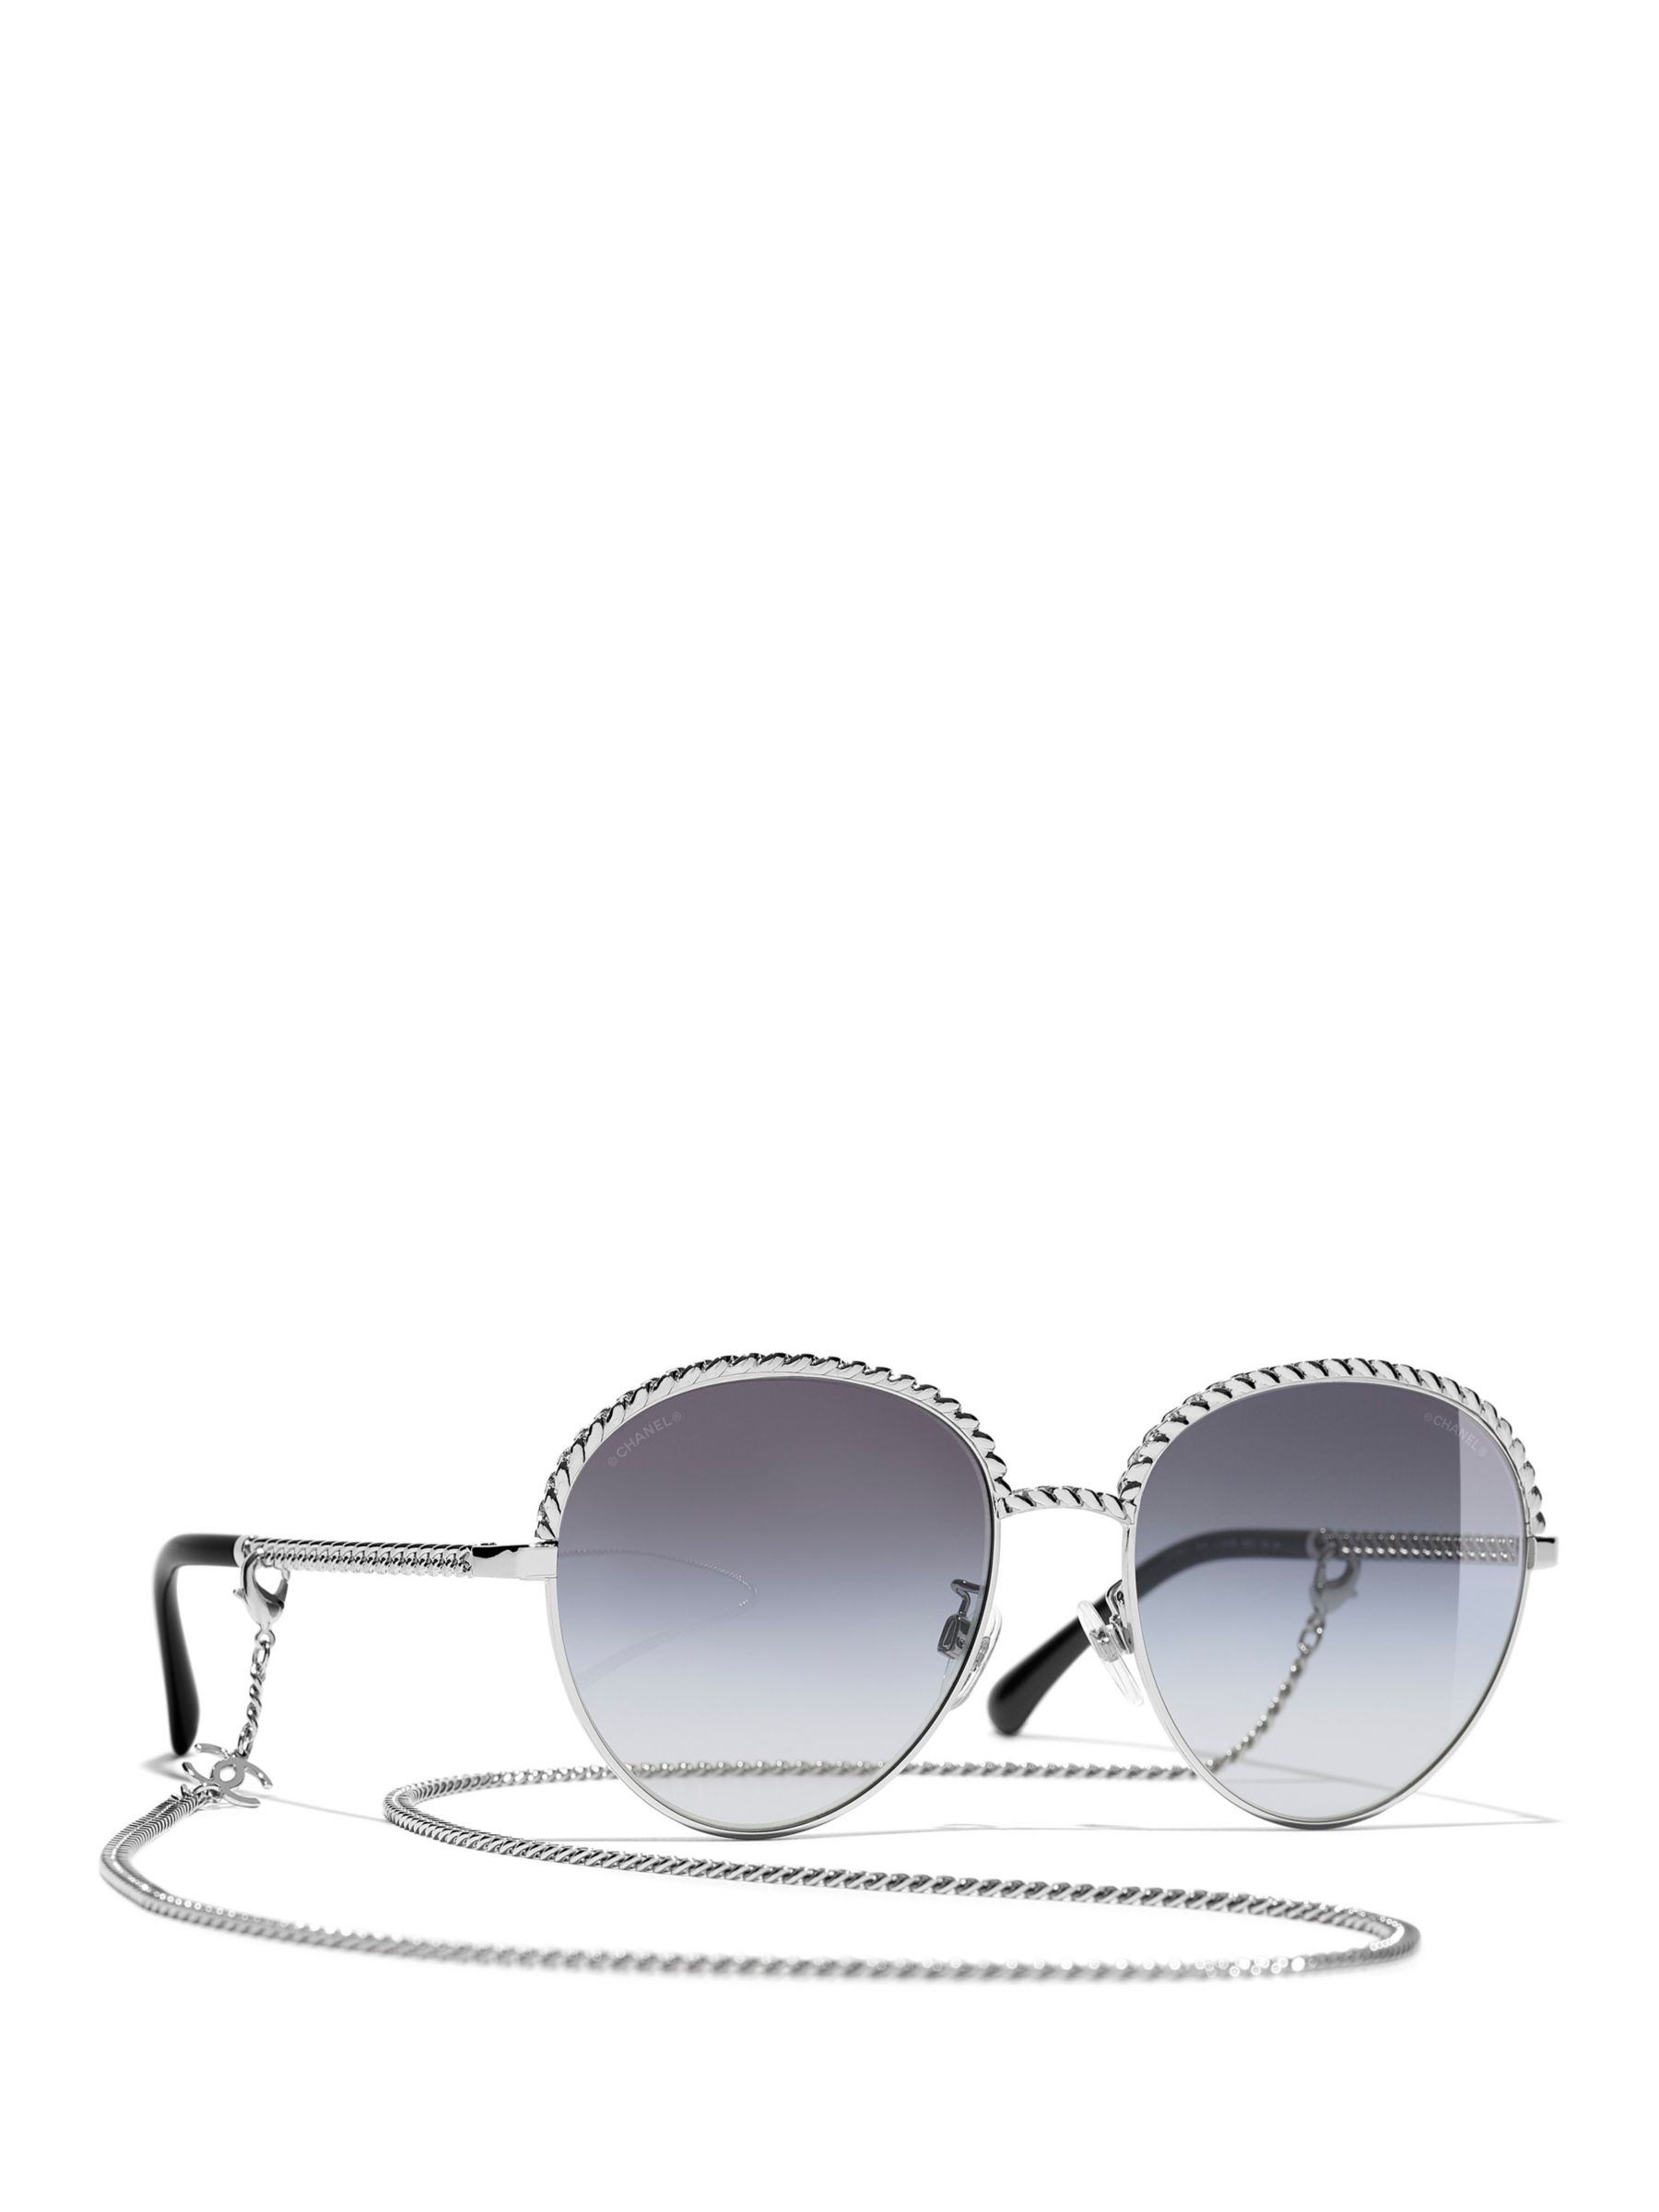 CHANEL Oval Sunglasses CH4242 Silver/Grey Gradient at John Lewis & Partners